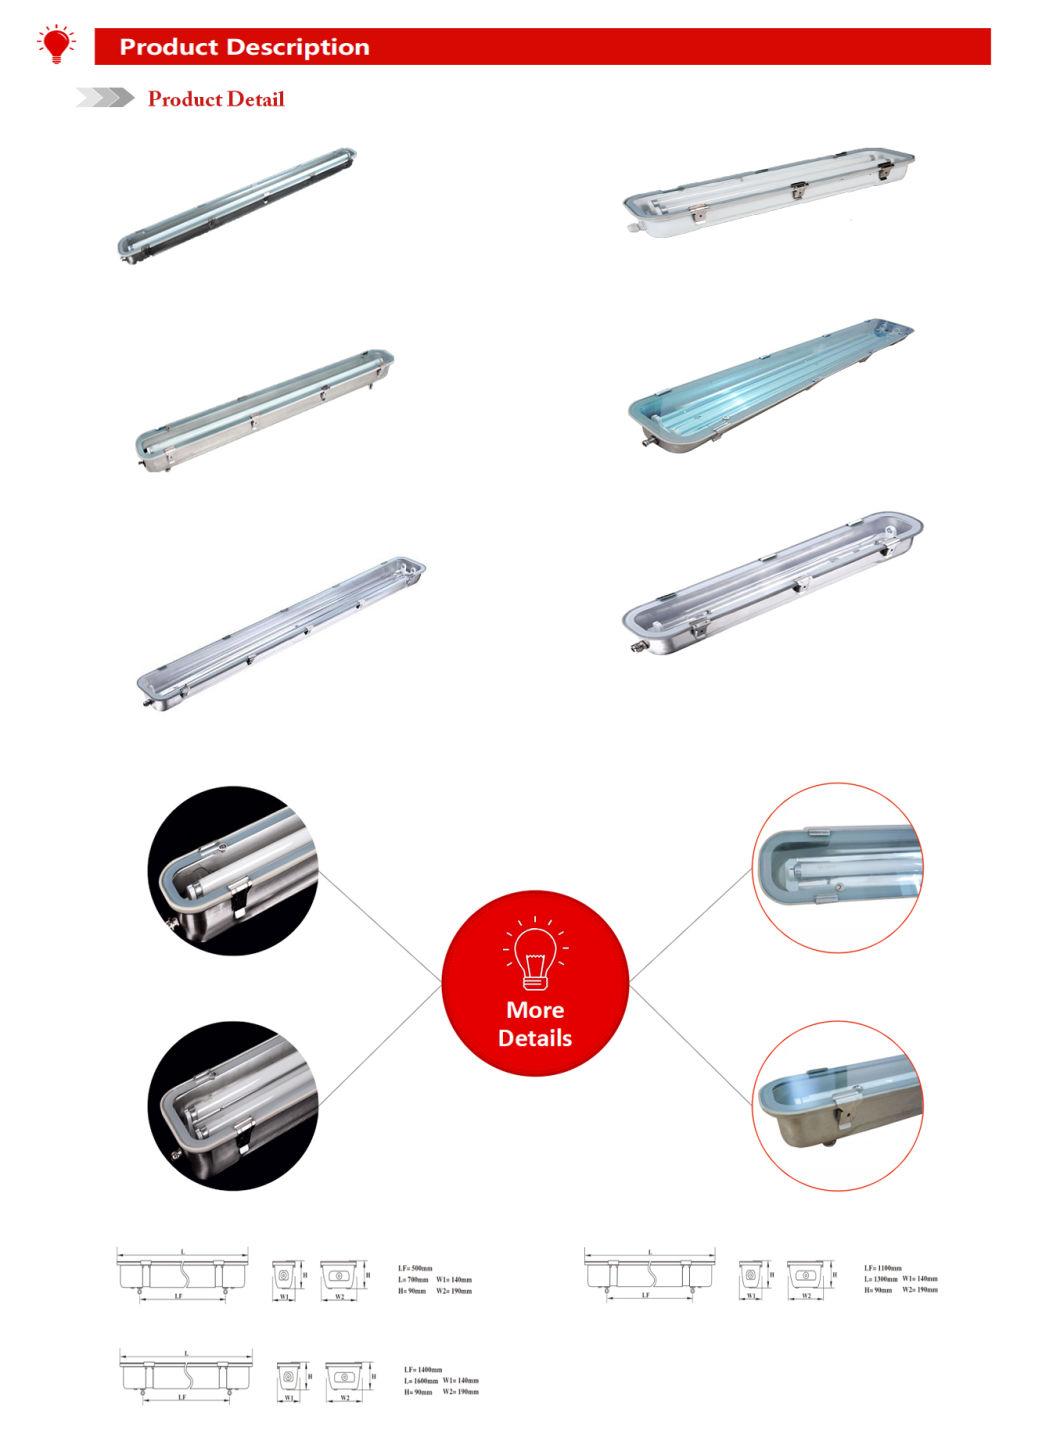 Stainless Steel Waterproof Outdoor IP65 Fluorescent LED Tube Lighting Fitting